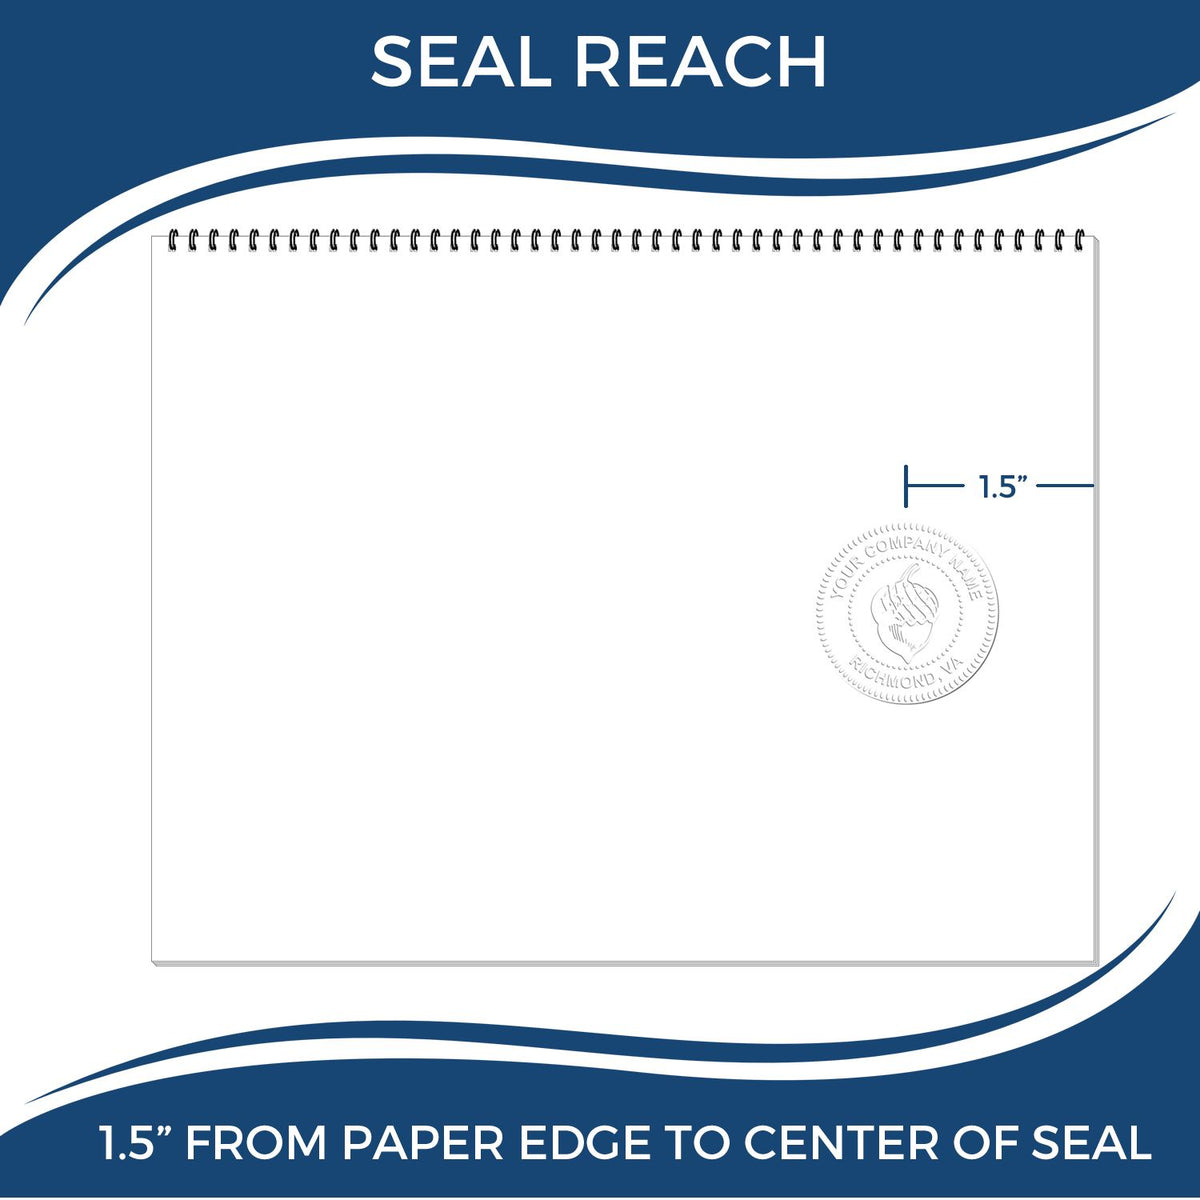 An infographic showing the seal reach which is represented by a ruler and a miniature seal image of the Gift Maine Landscape Architect Seal